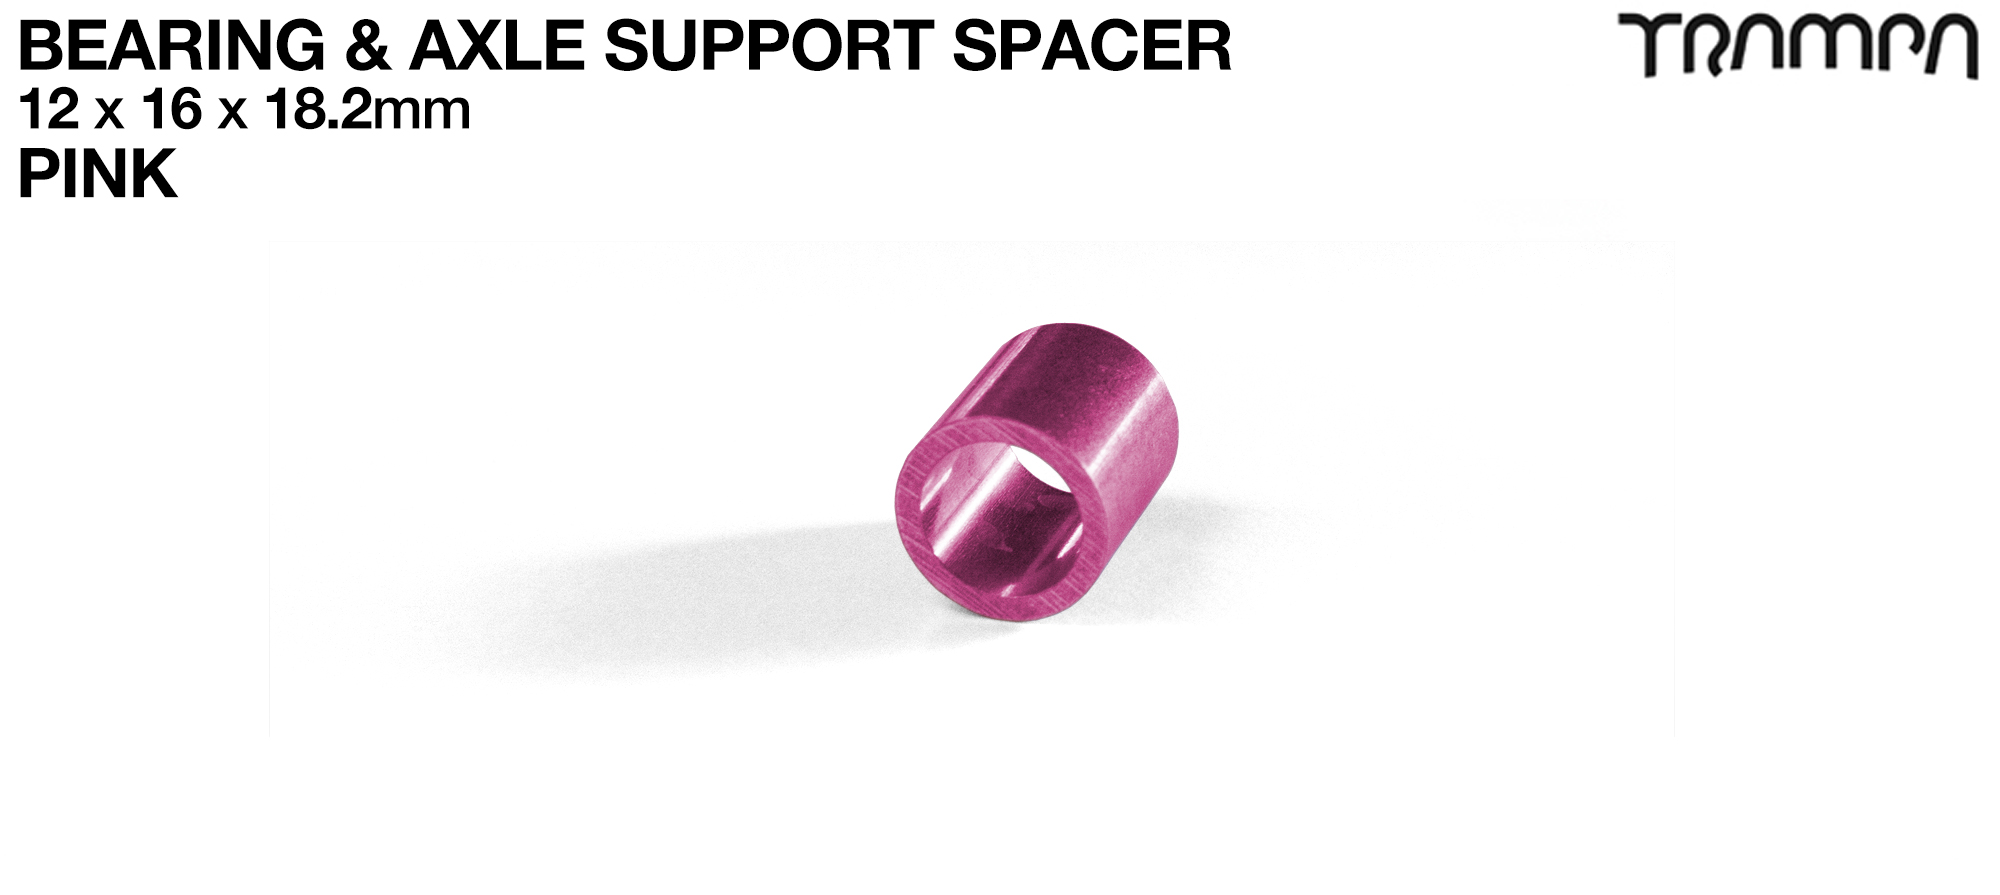 18.2mm Wheel Support Axle Spacers - PINK 